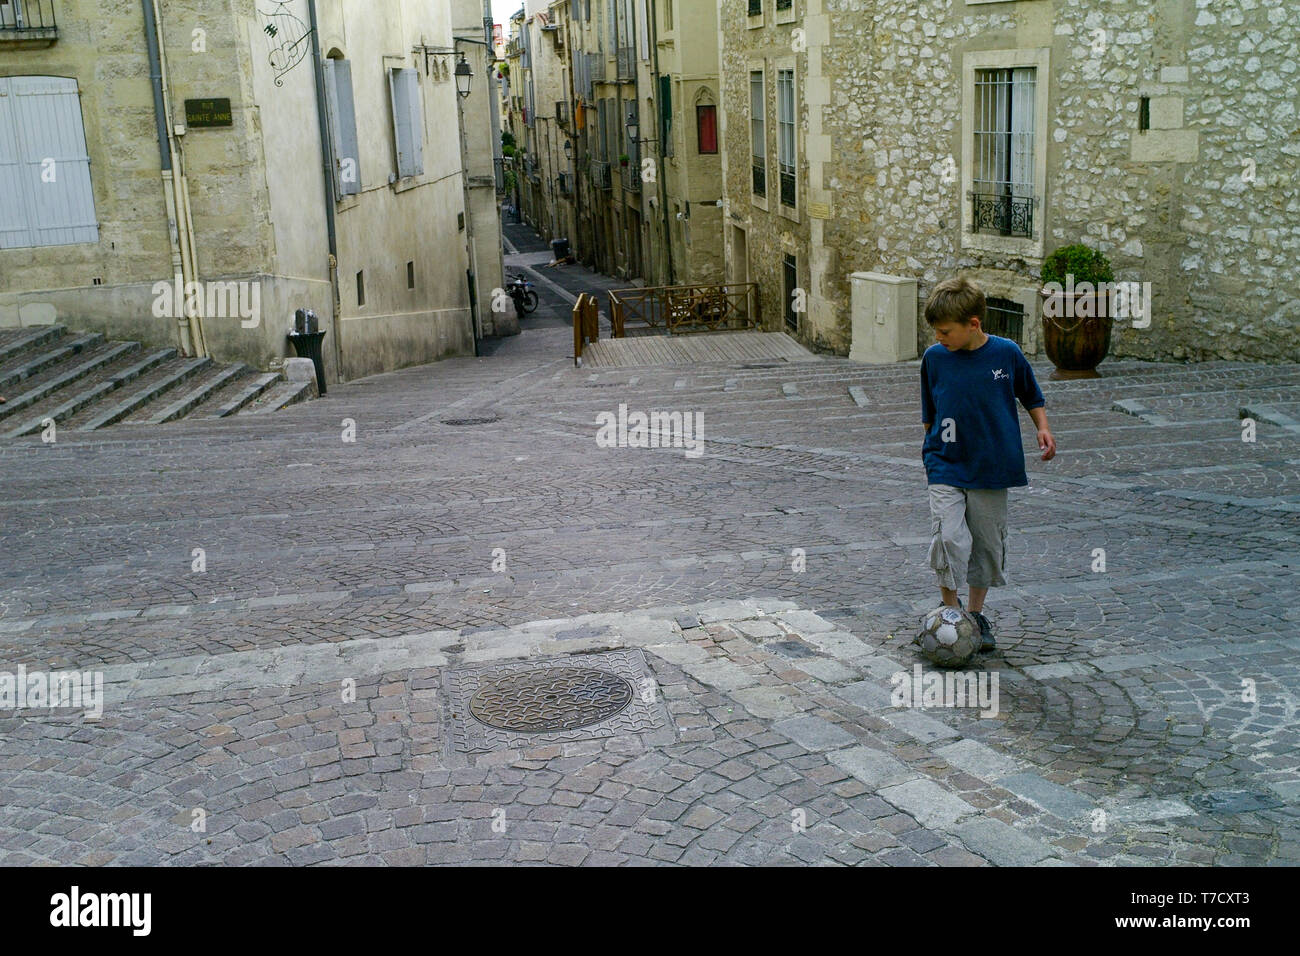 Street view, Montpellier, Aude, France Stock Photo